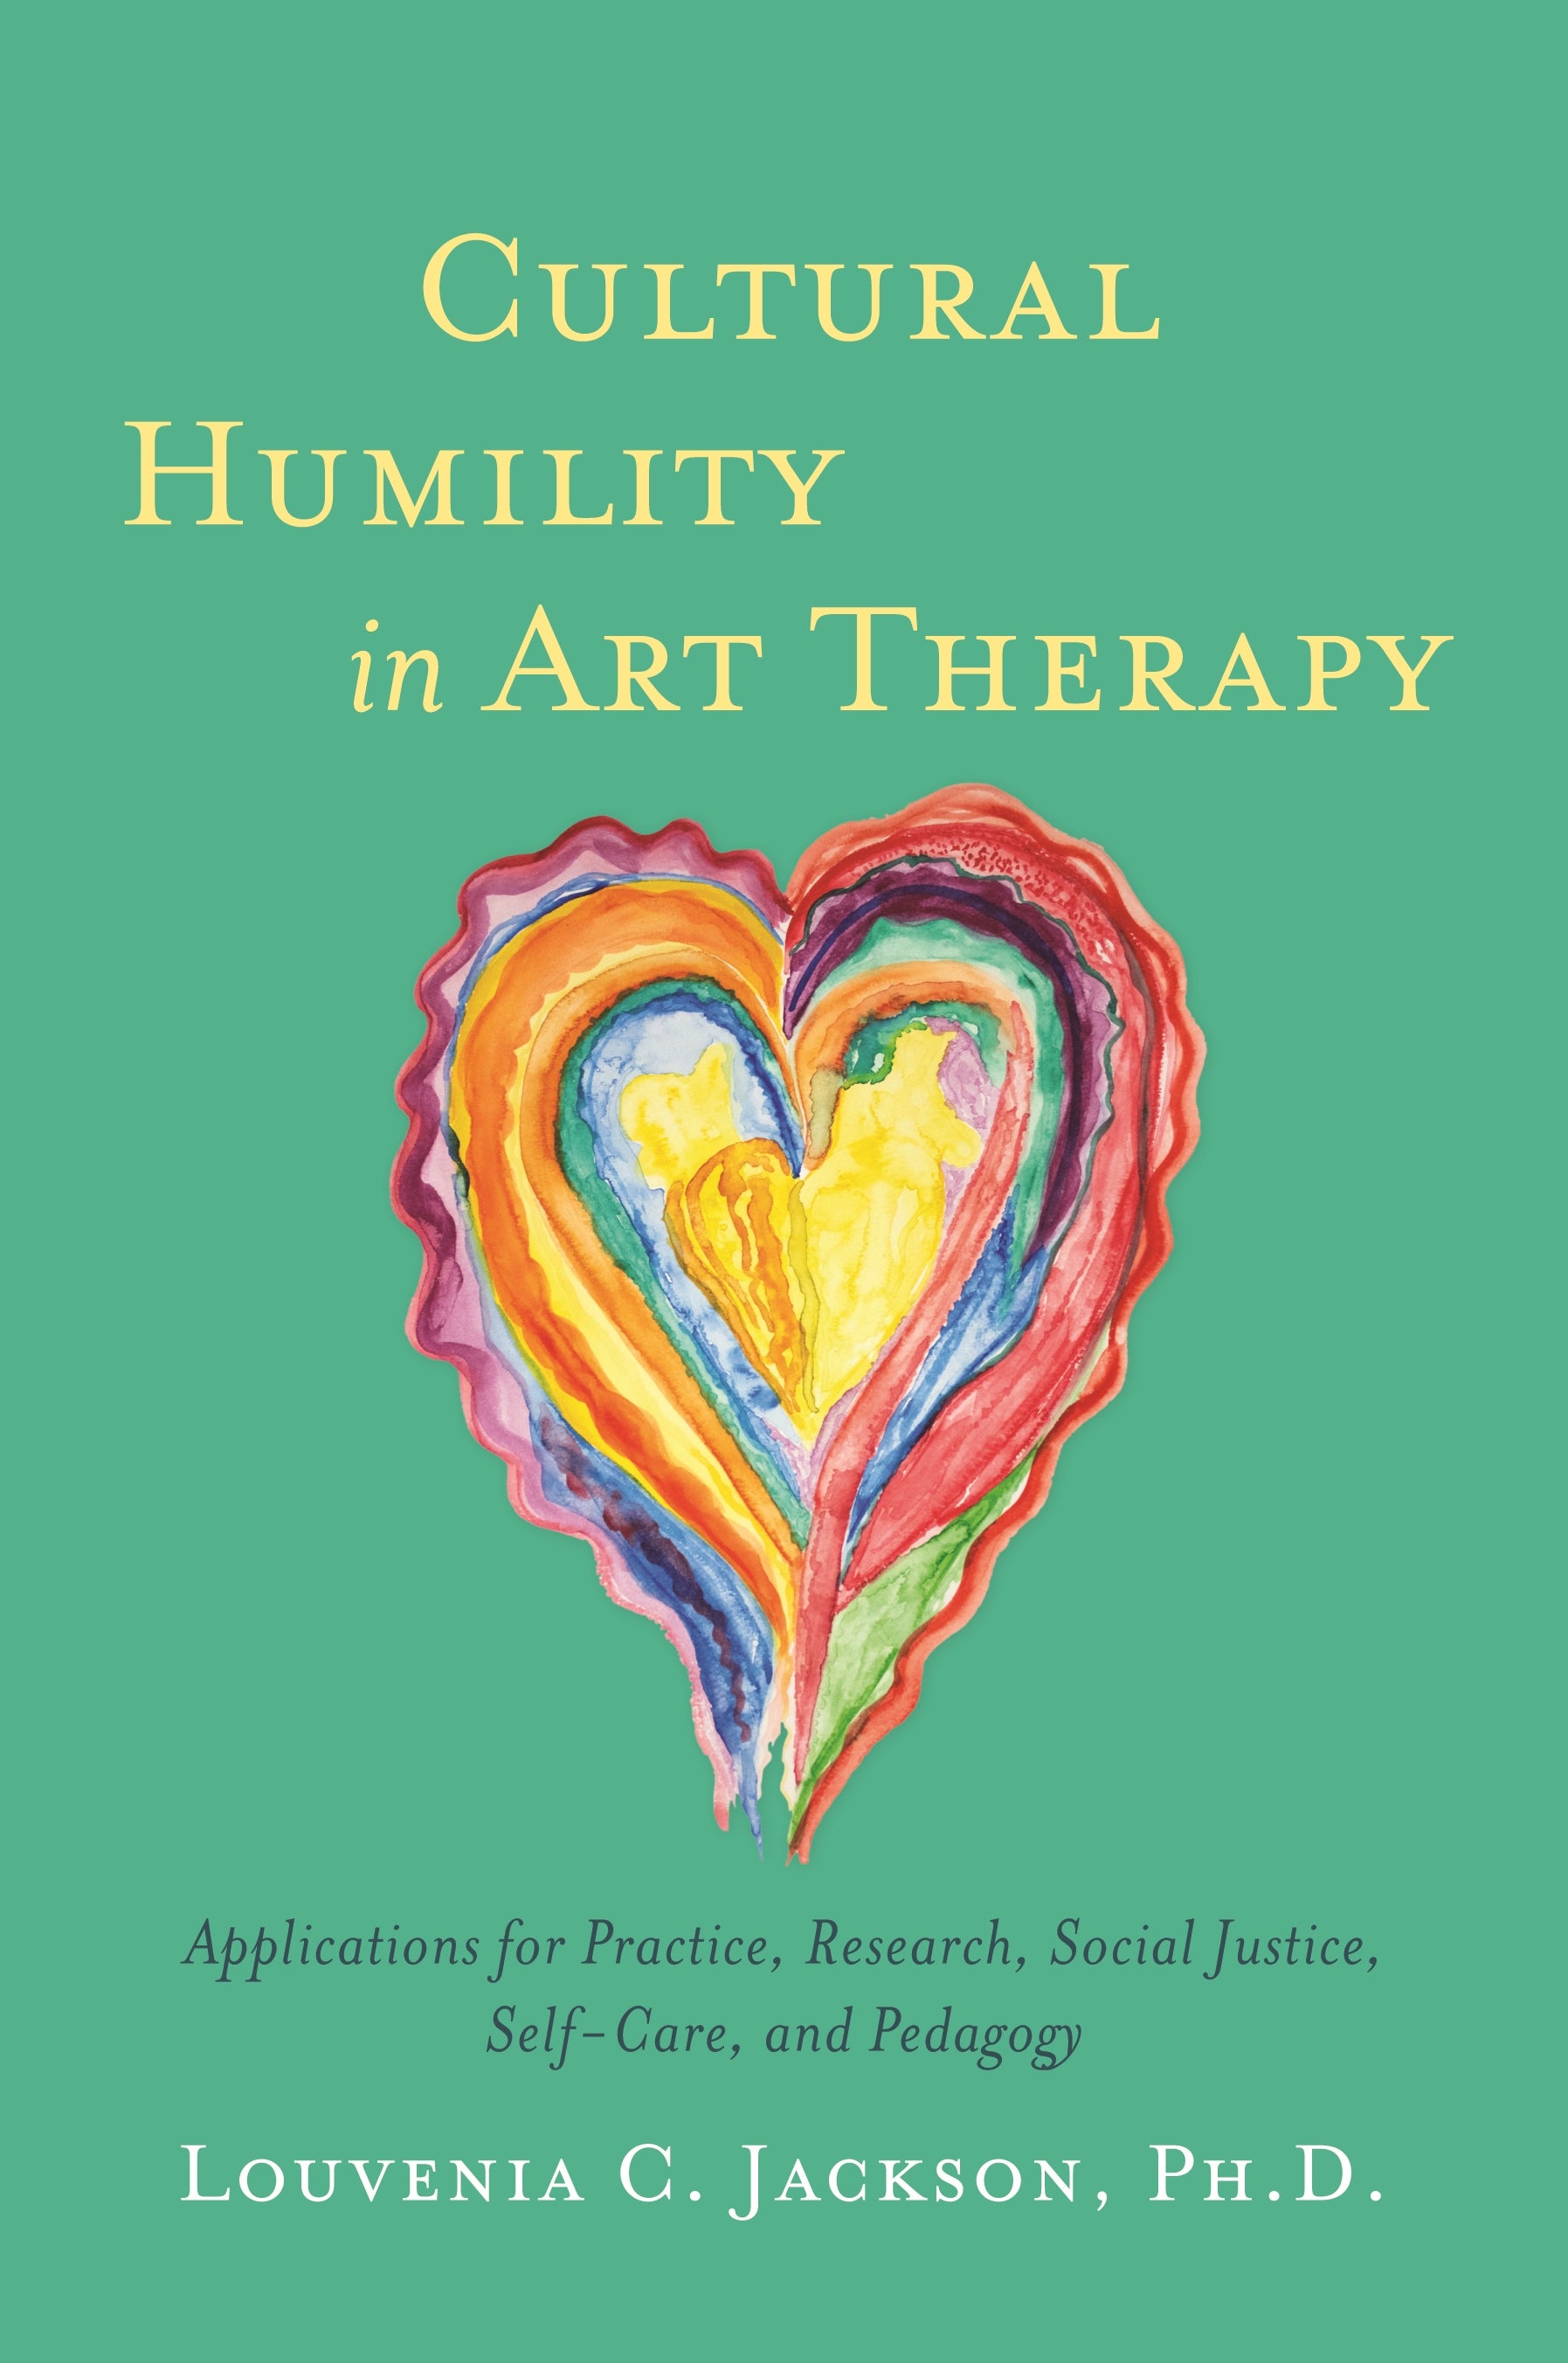 Cultural Humility in Art Therapy by Louvenia Jackson, Melanie Tervalon